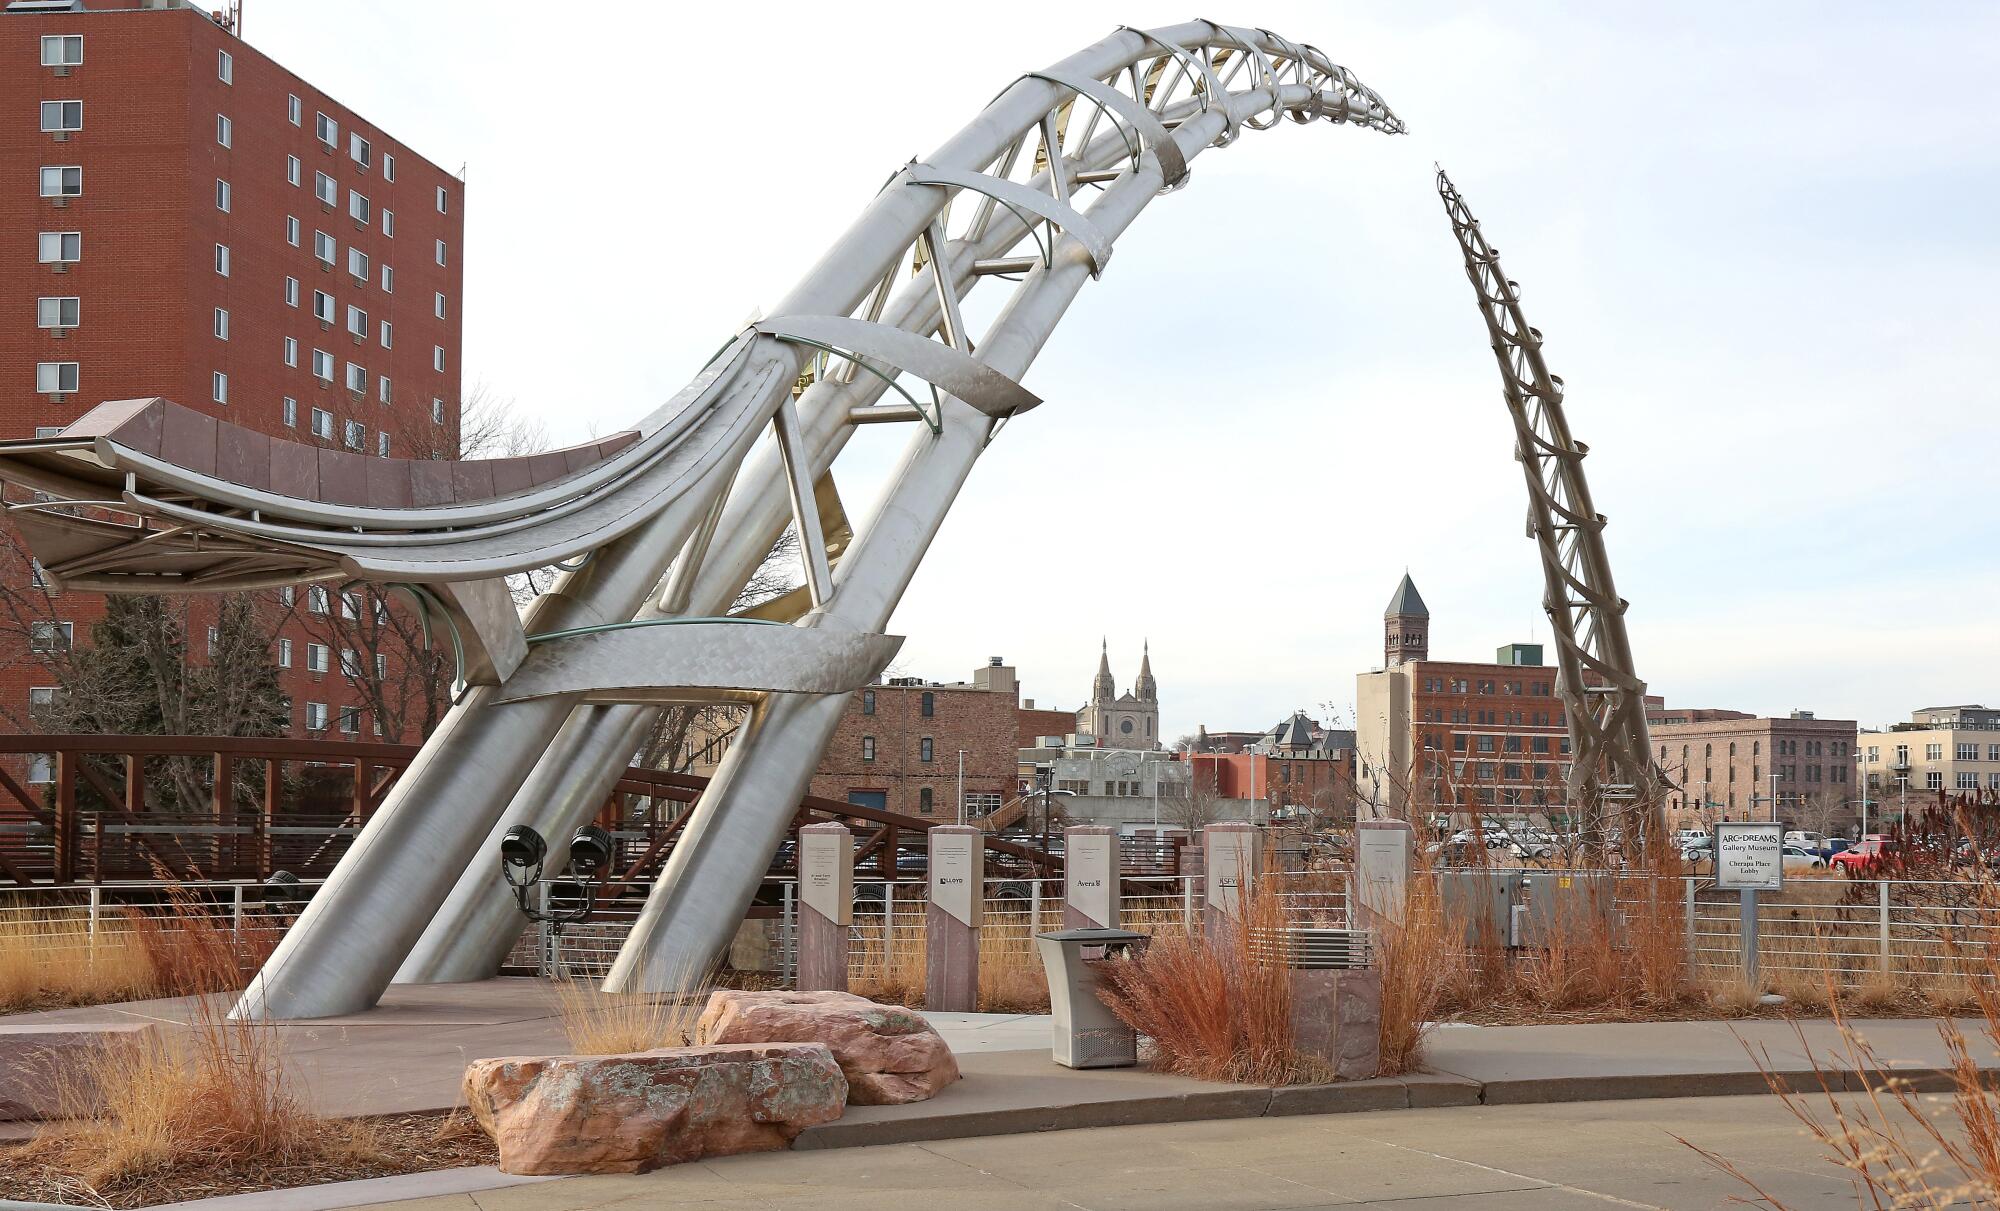 The Arc of Dreams sculpture in downtown Sioux Falls.